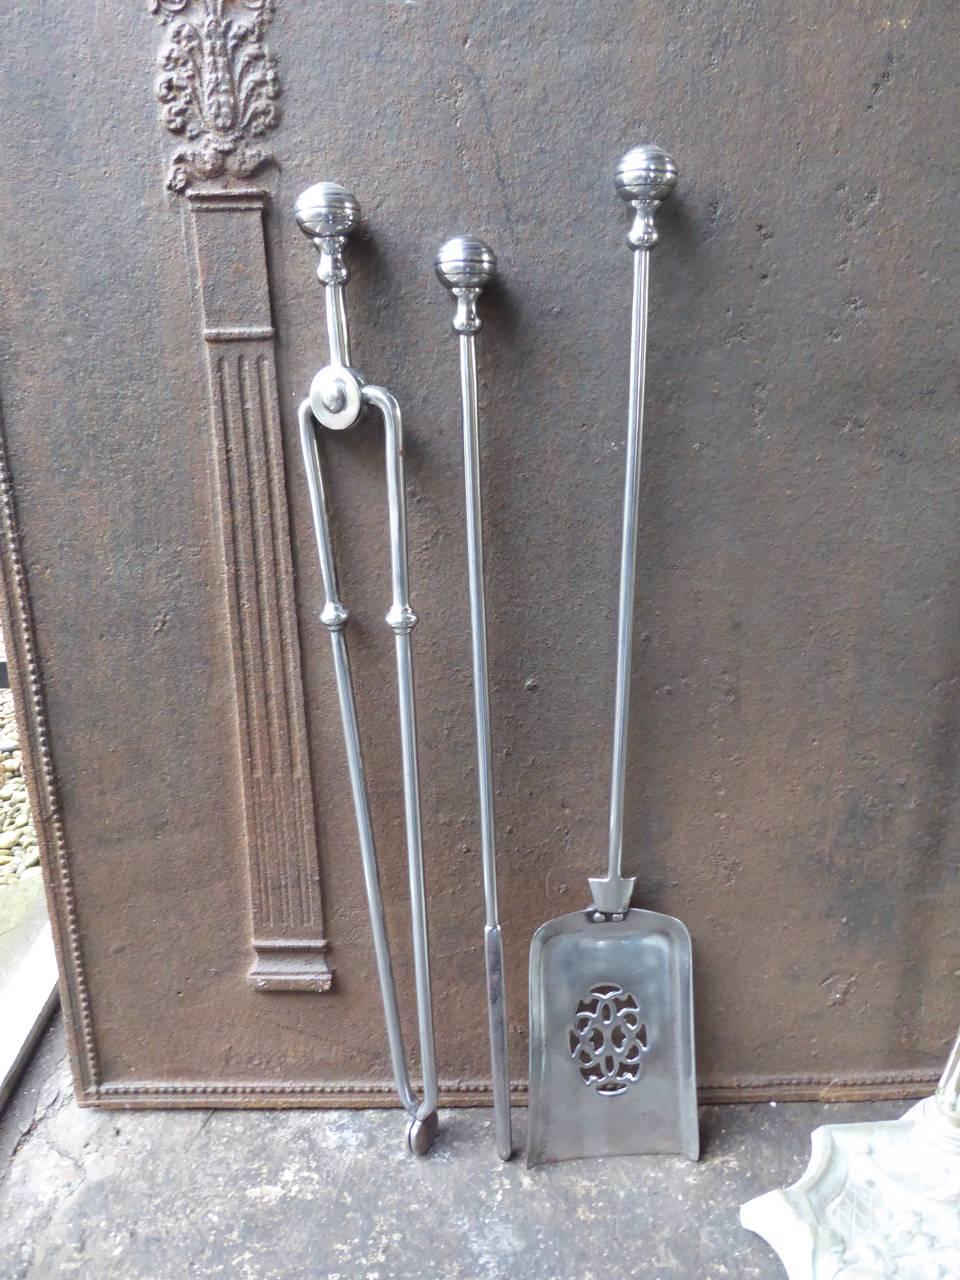 19th century English fireplace tools, fire irons made of polished steel and brass.

We have a unique and specialized collection of antique and used fireplace accessories consisting of more than 1000 listings at 1stdibs. Amongst others, we always